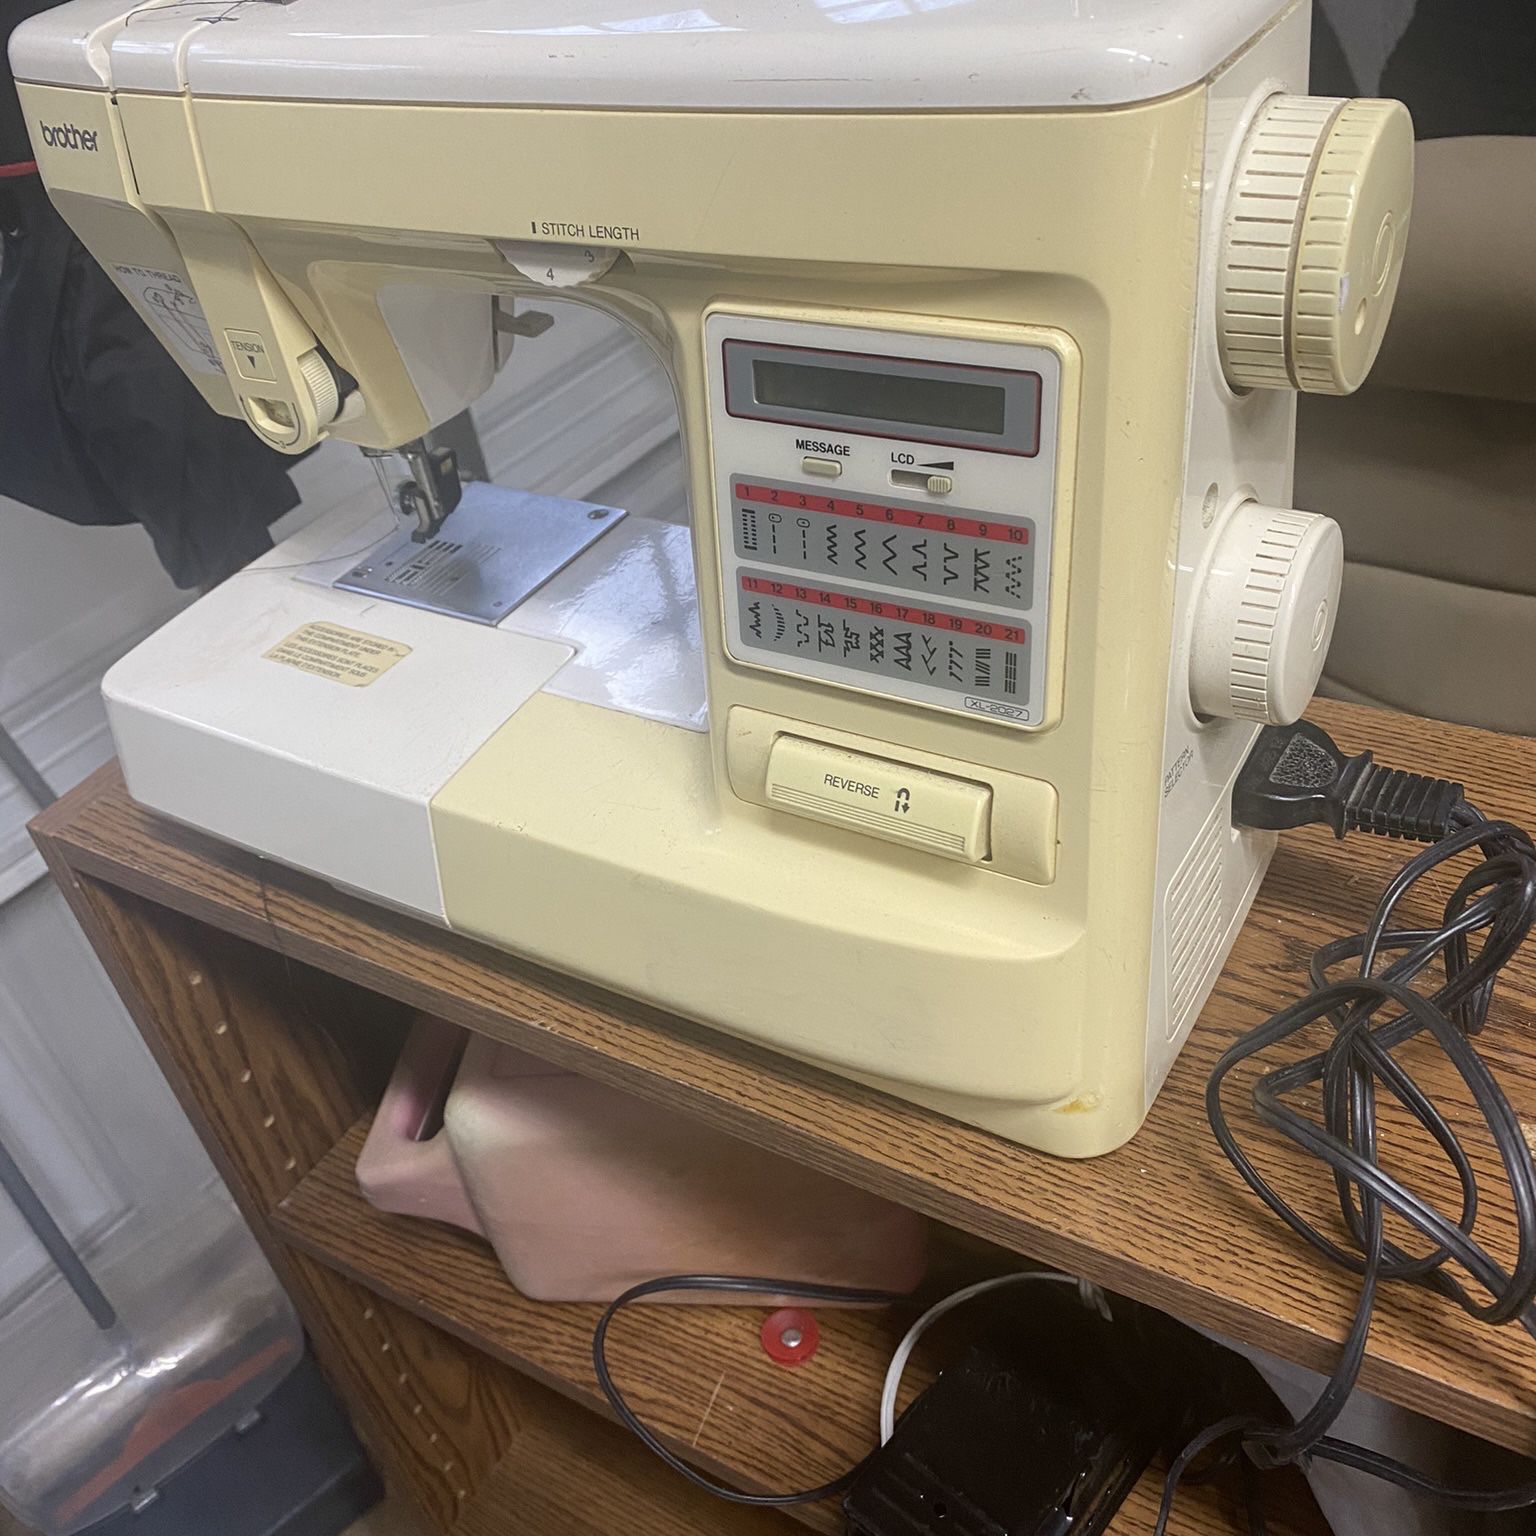 Brother XM2701 Sewing Machine for Sale in Tulsa, OK - OfferUp